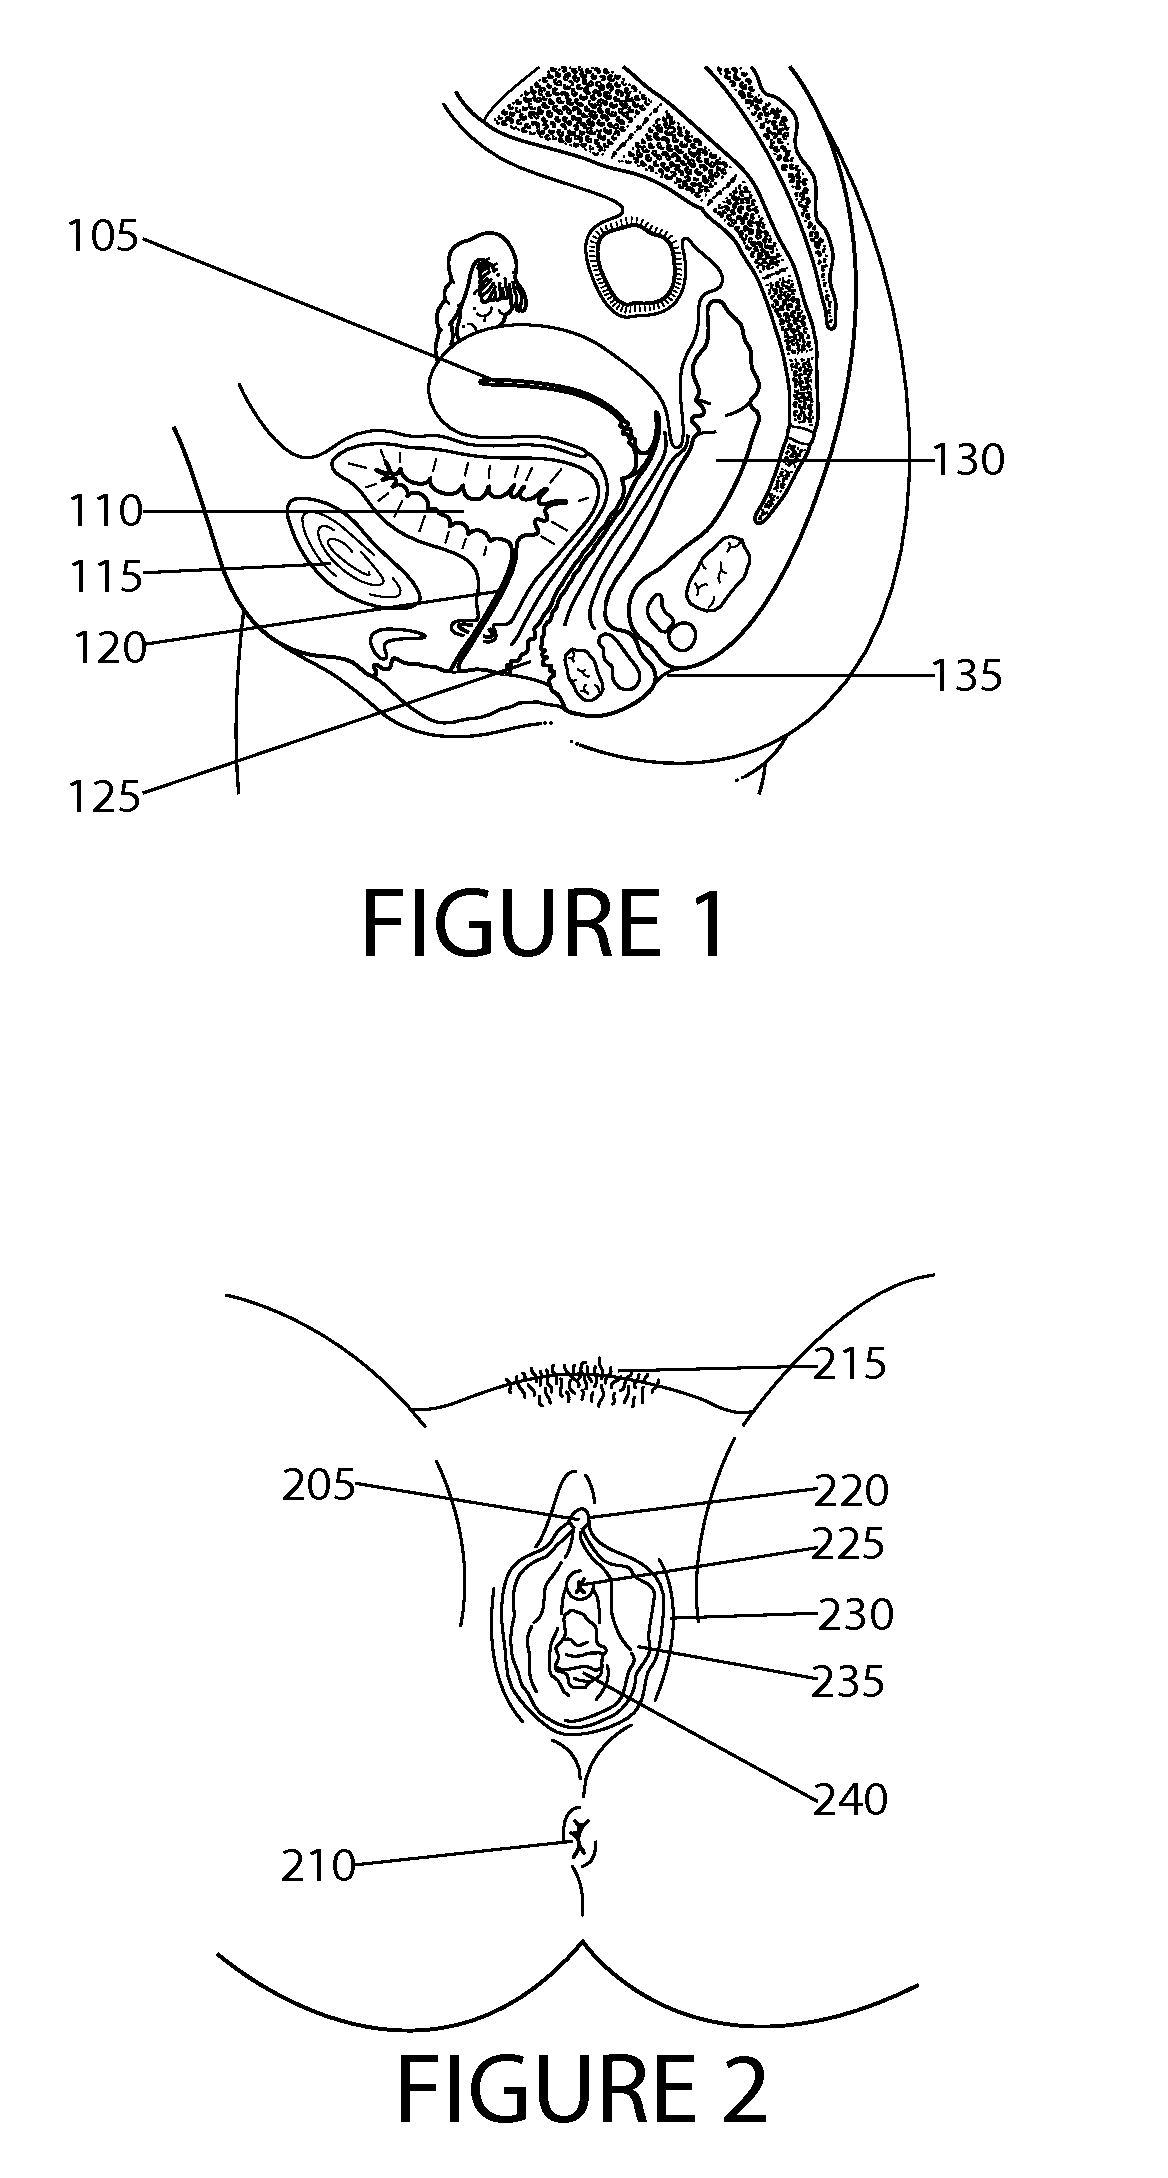 Surgical devices and method for vaginal prolapse repair